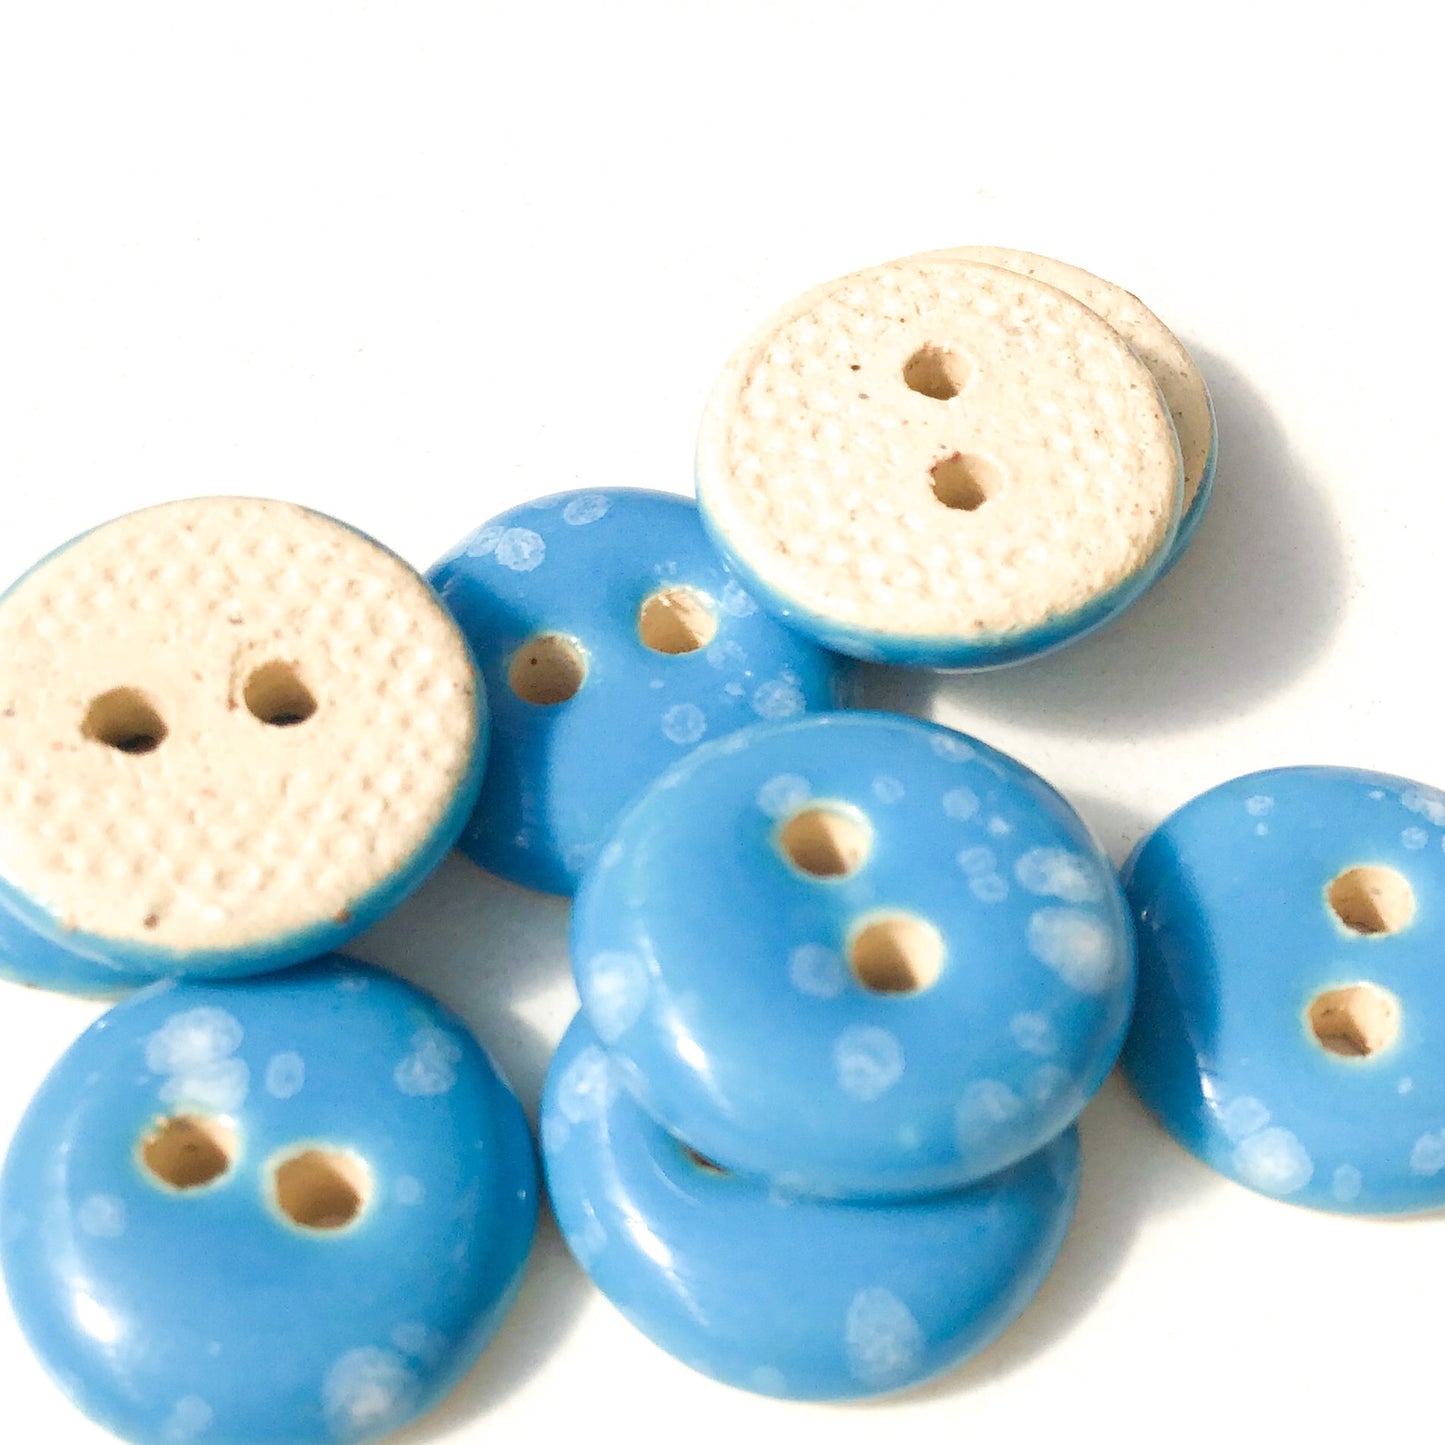 Speckled Blue Ceramic Buttons - Blue Clay Buttons - 9/16" - 9 Pack